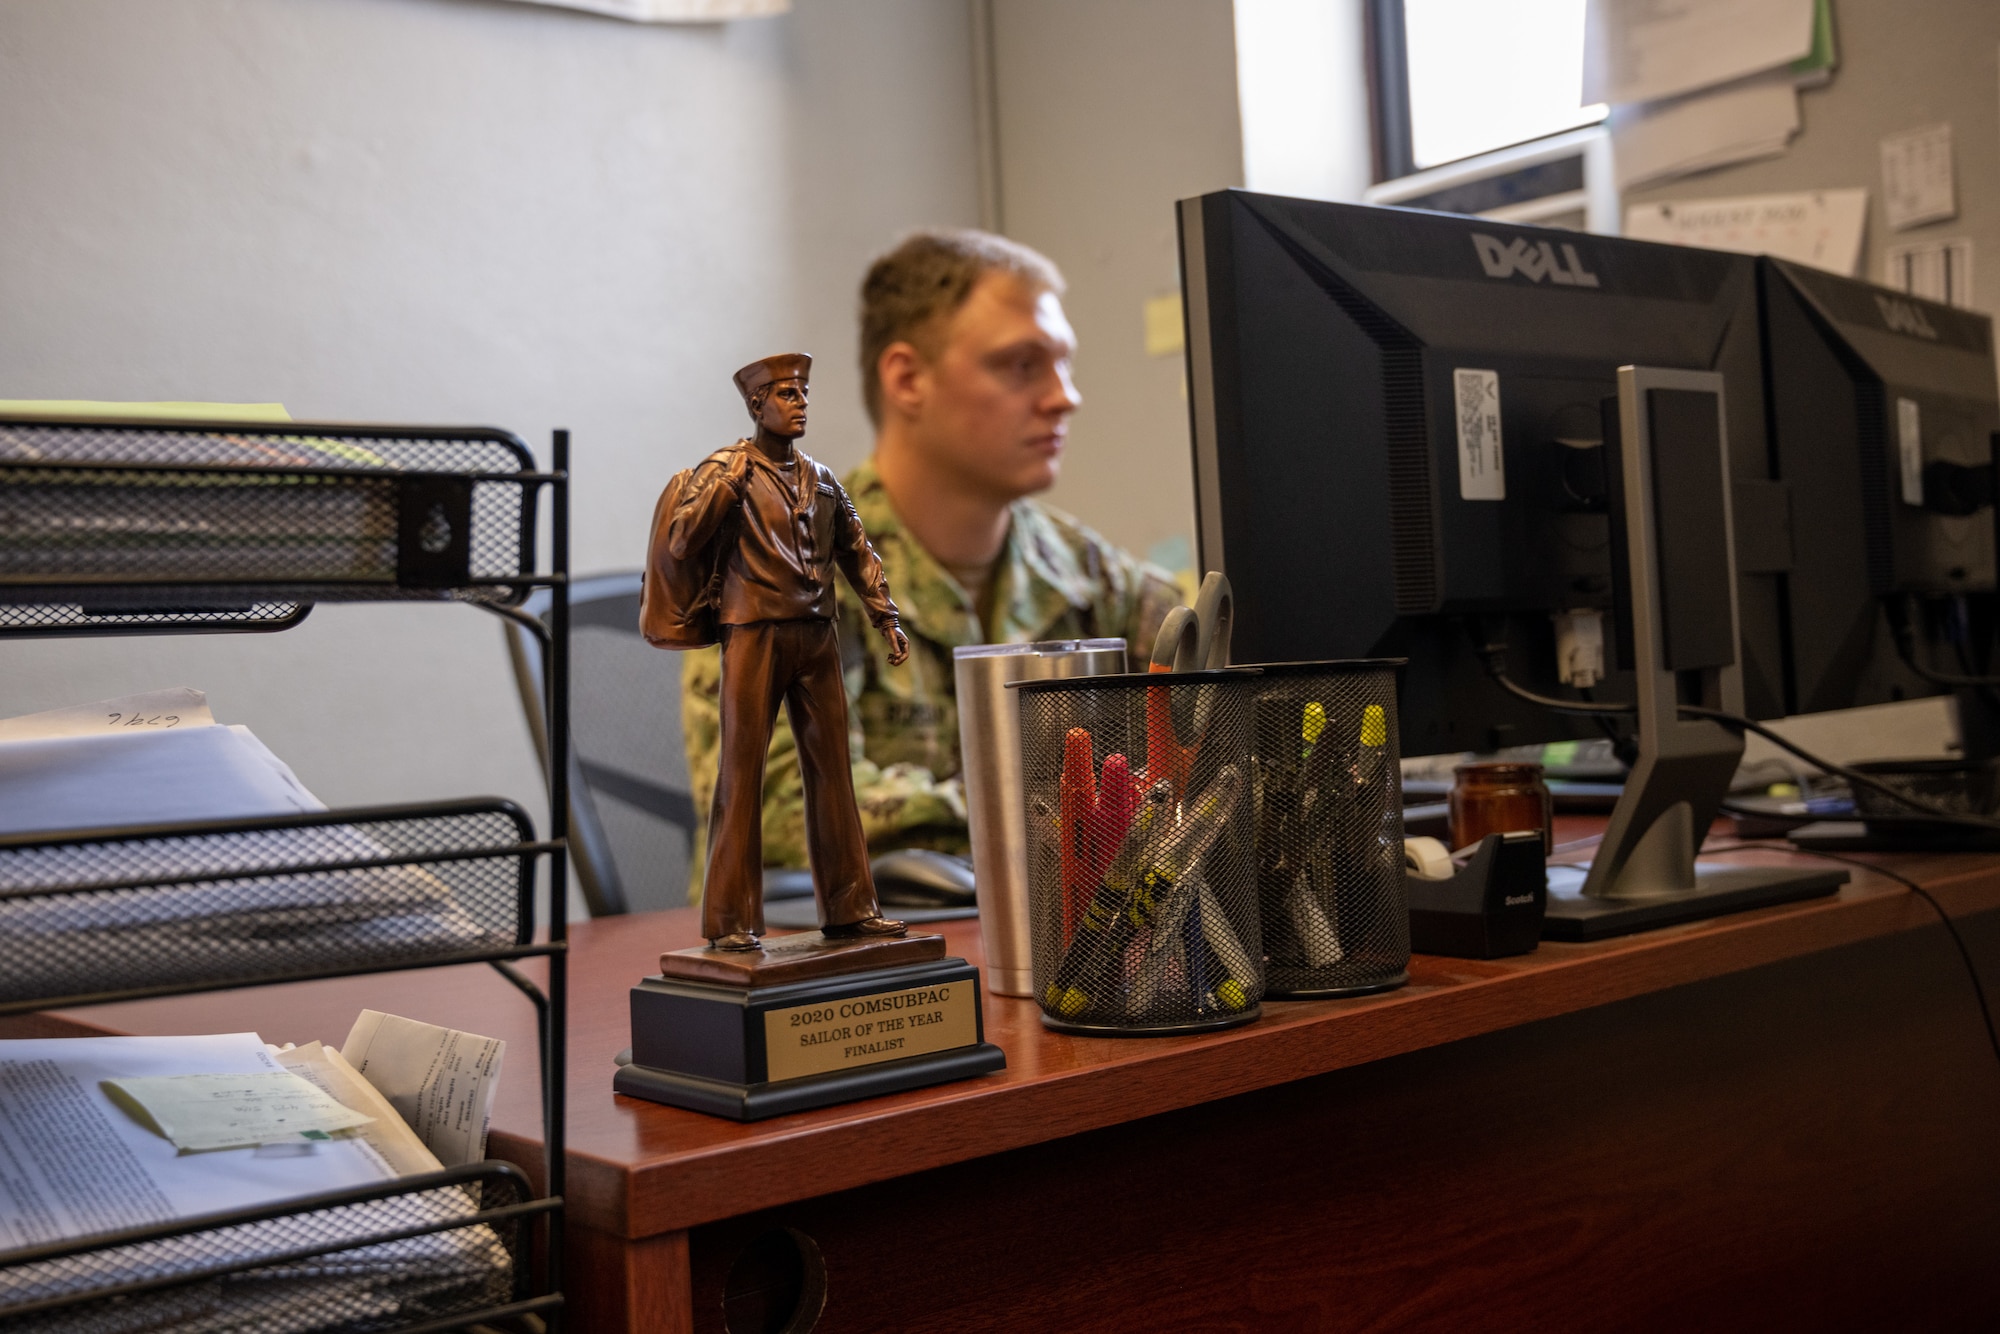 A statue that says "US Navy Sailor of the Year Finalist" sits on the corner of an office desk while a Navy service member works at their computer.